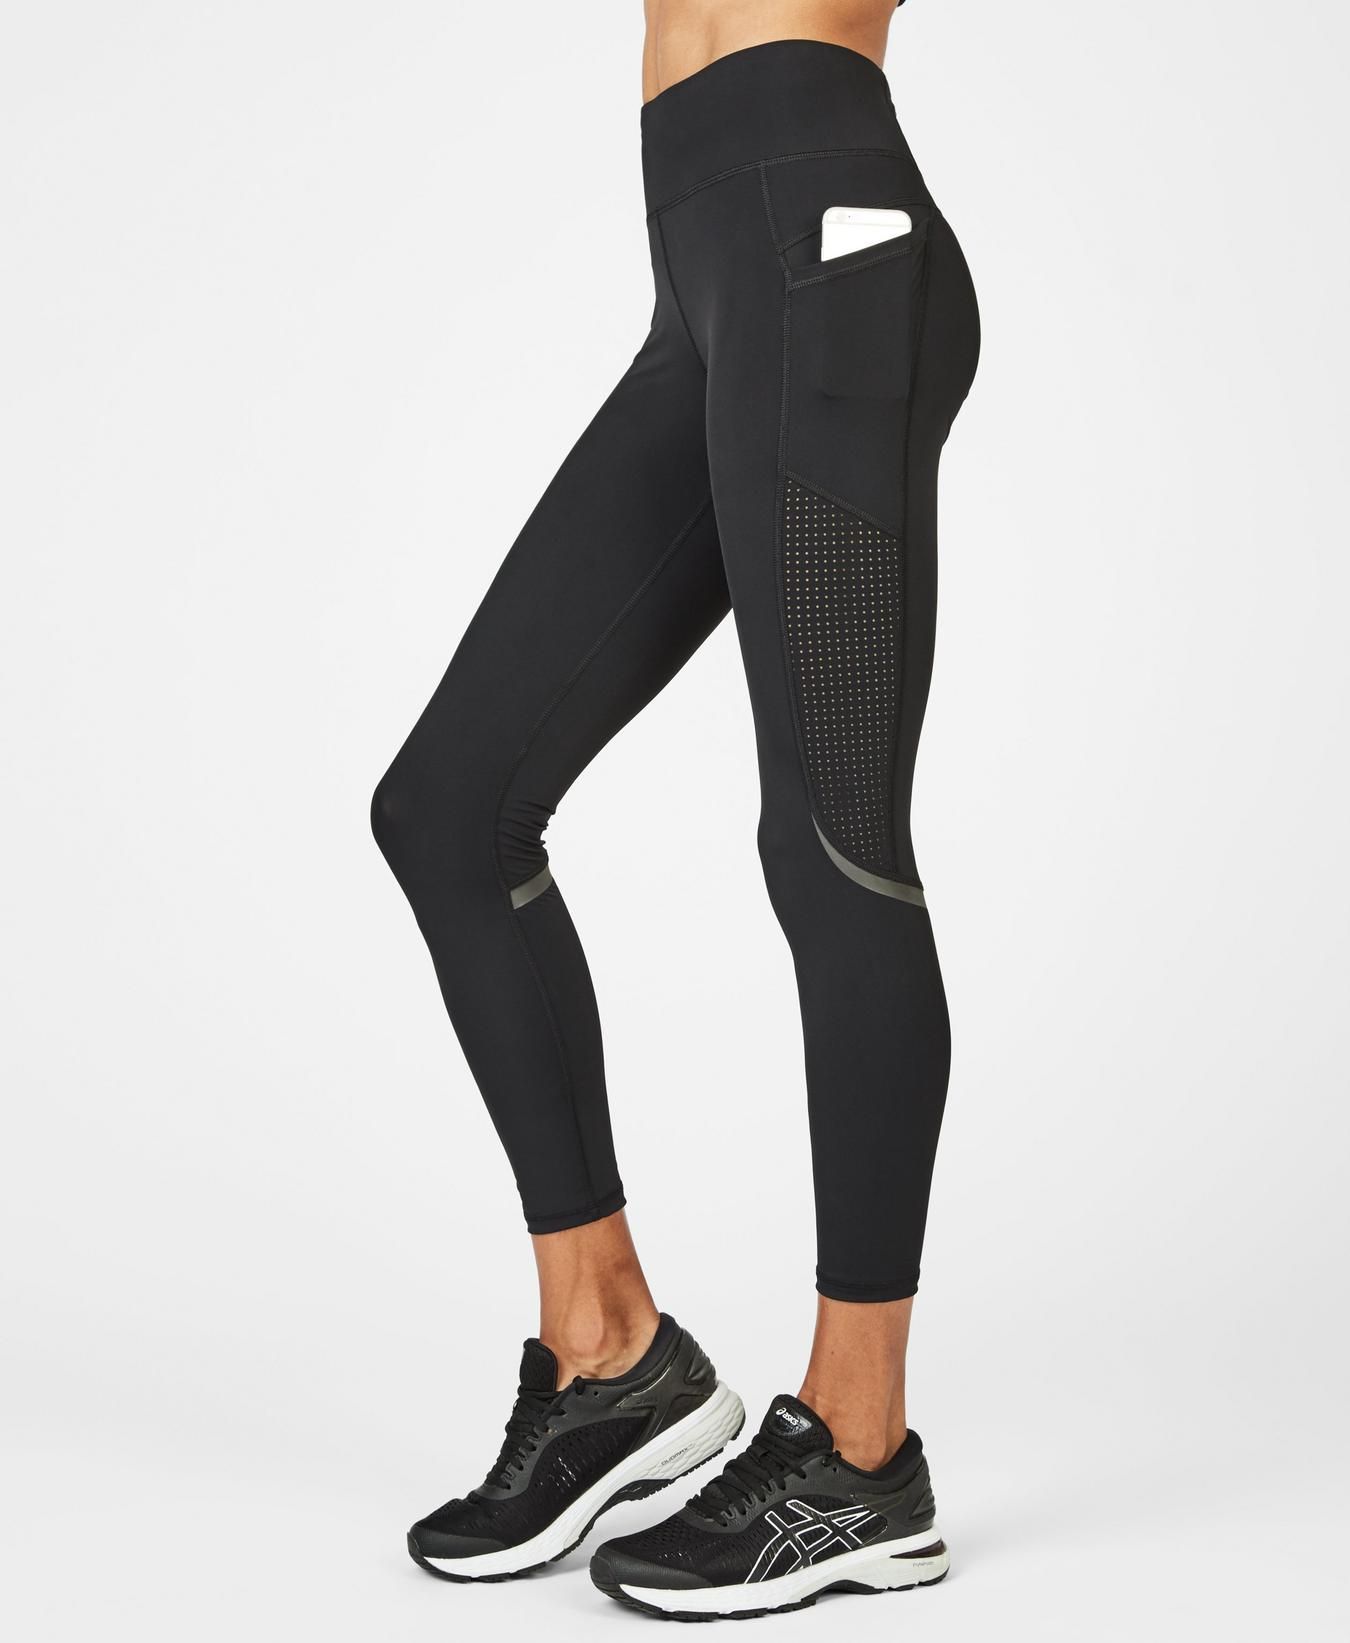 The black gym leggings you need to add to your workout wardrobe | My ...